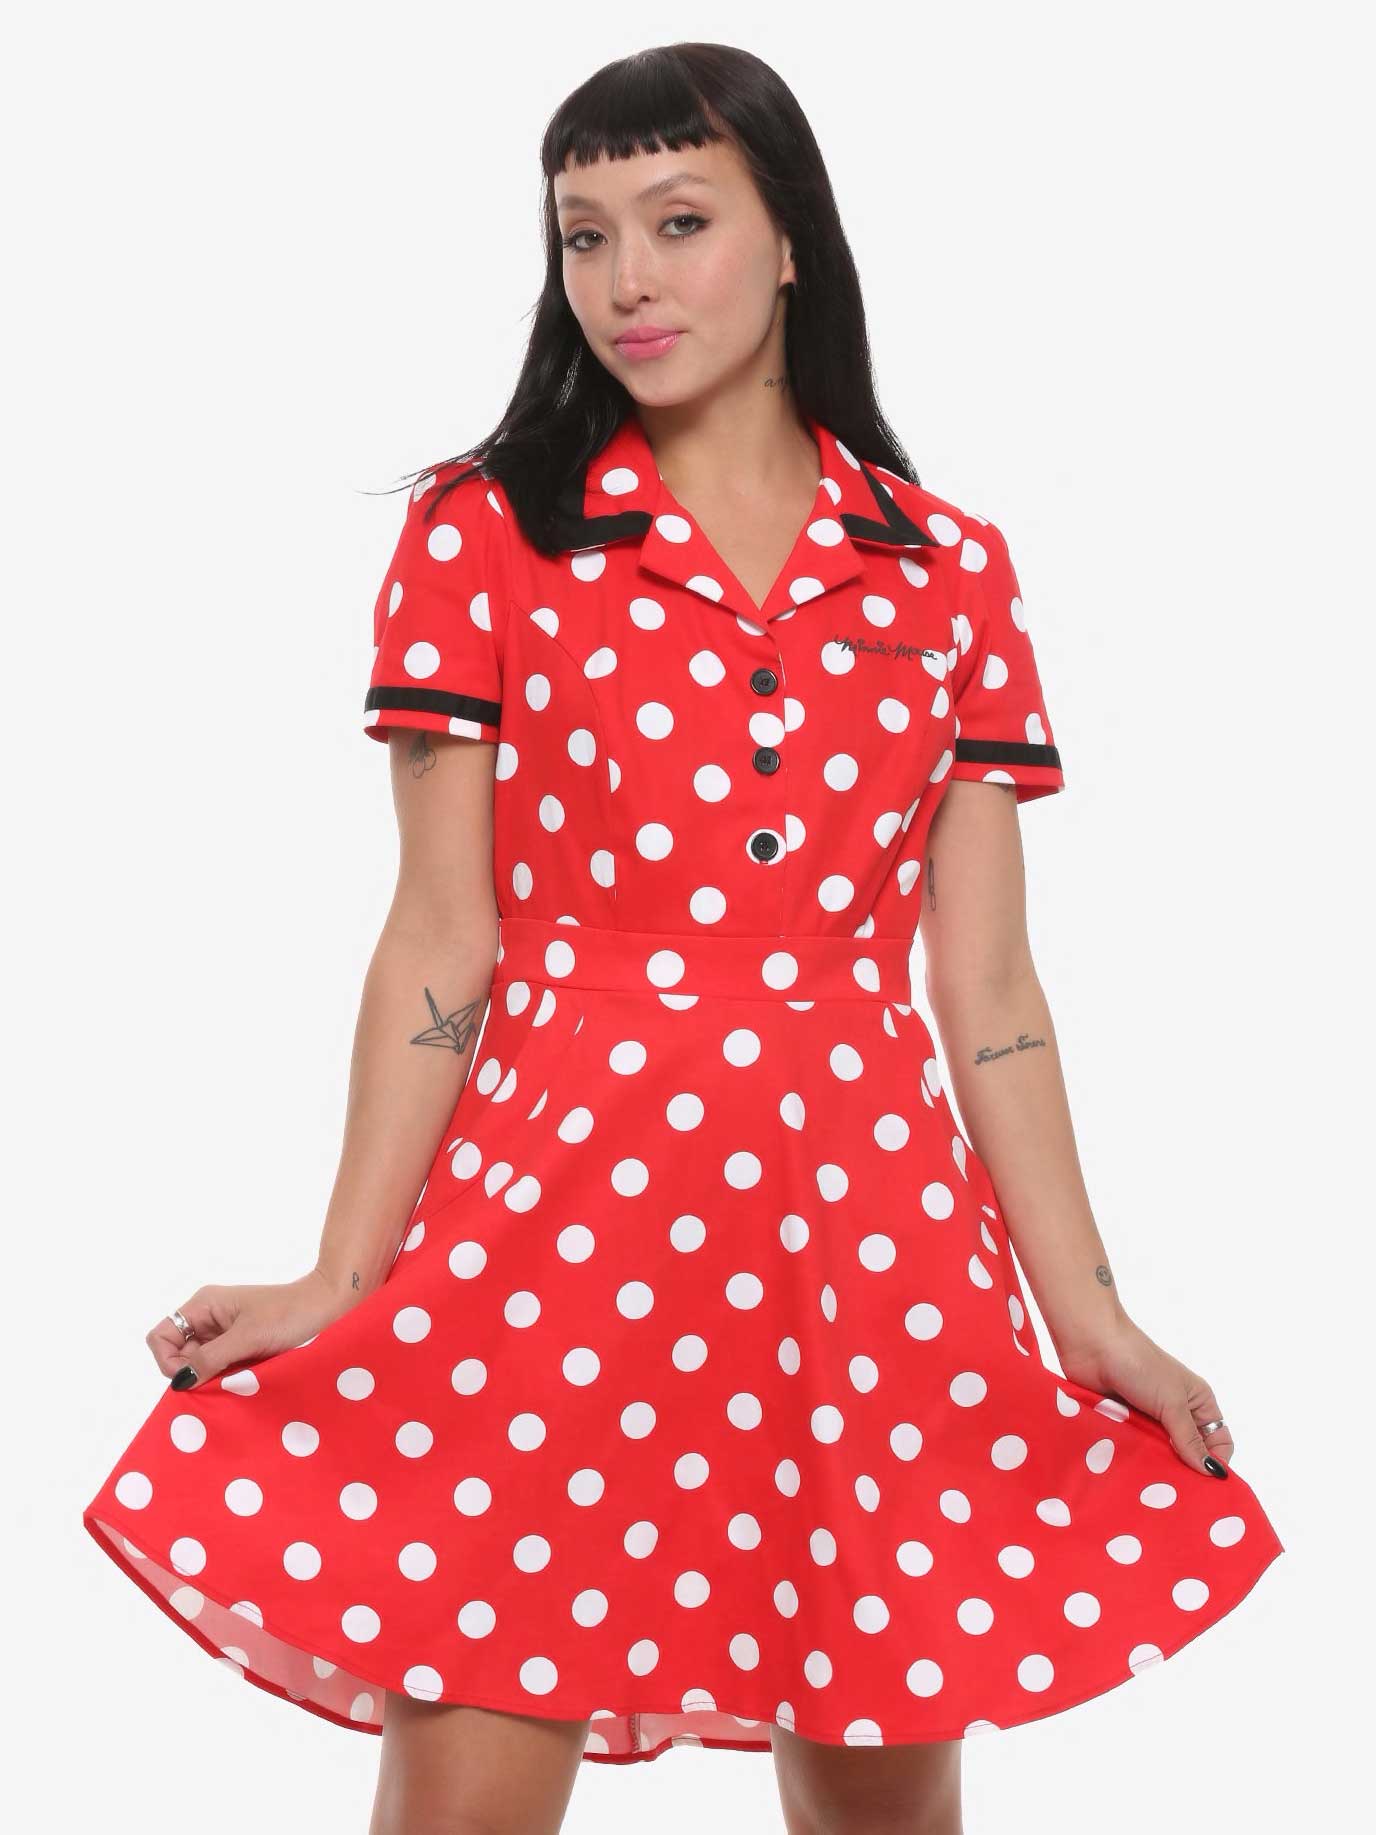 red retro dress with collar and white polka dots